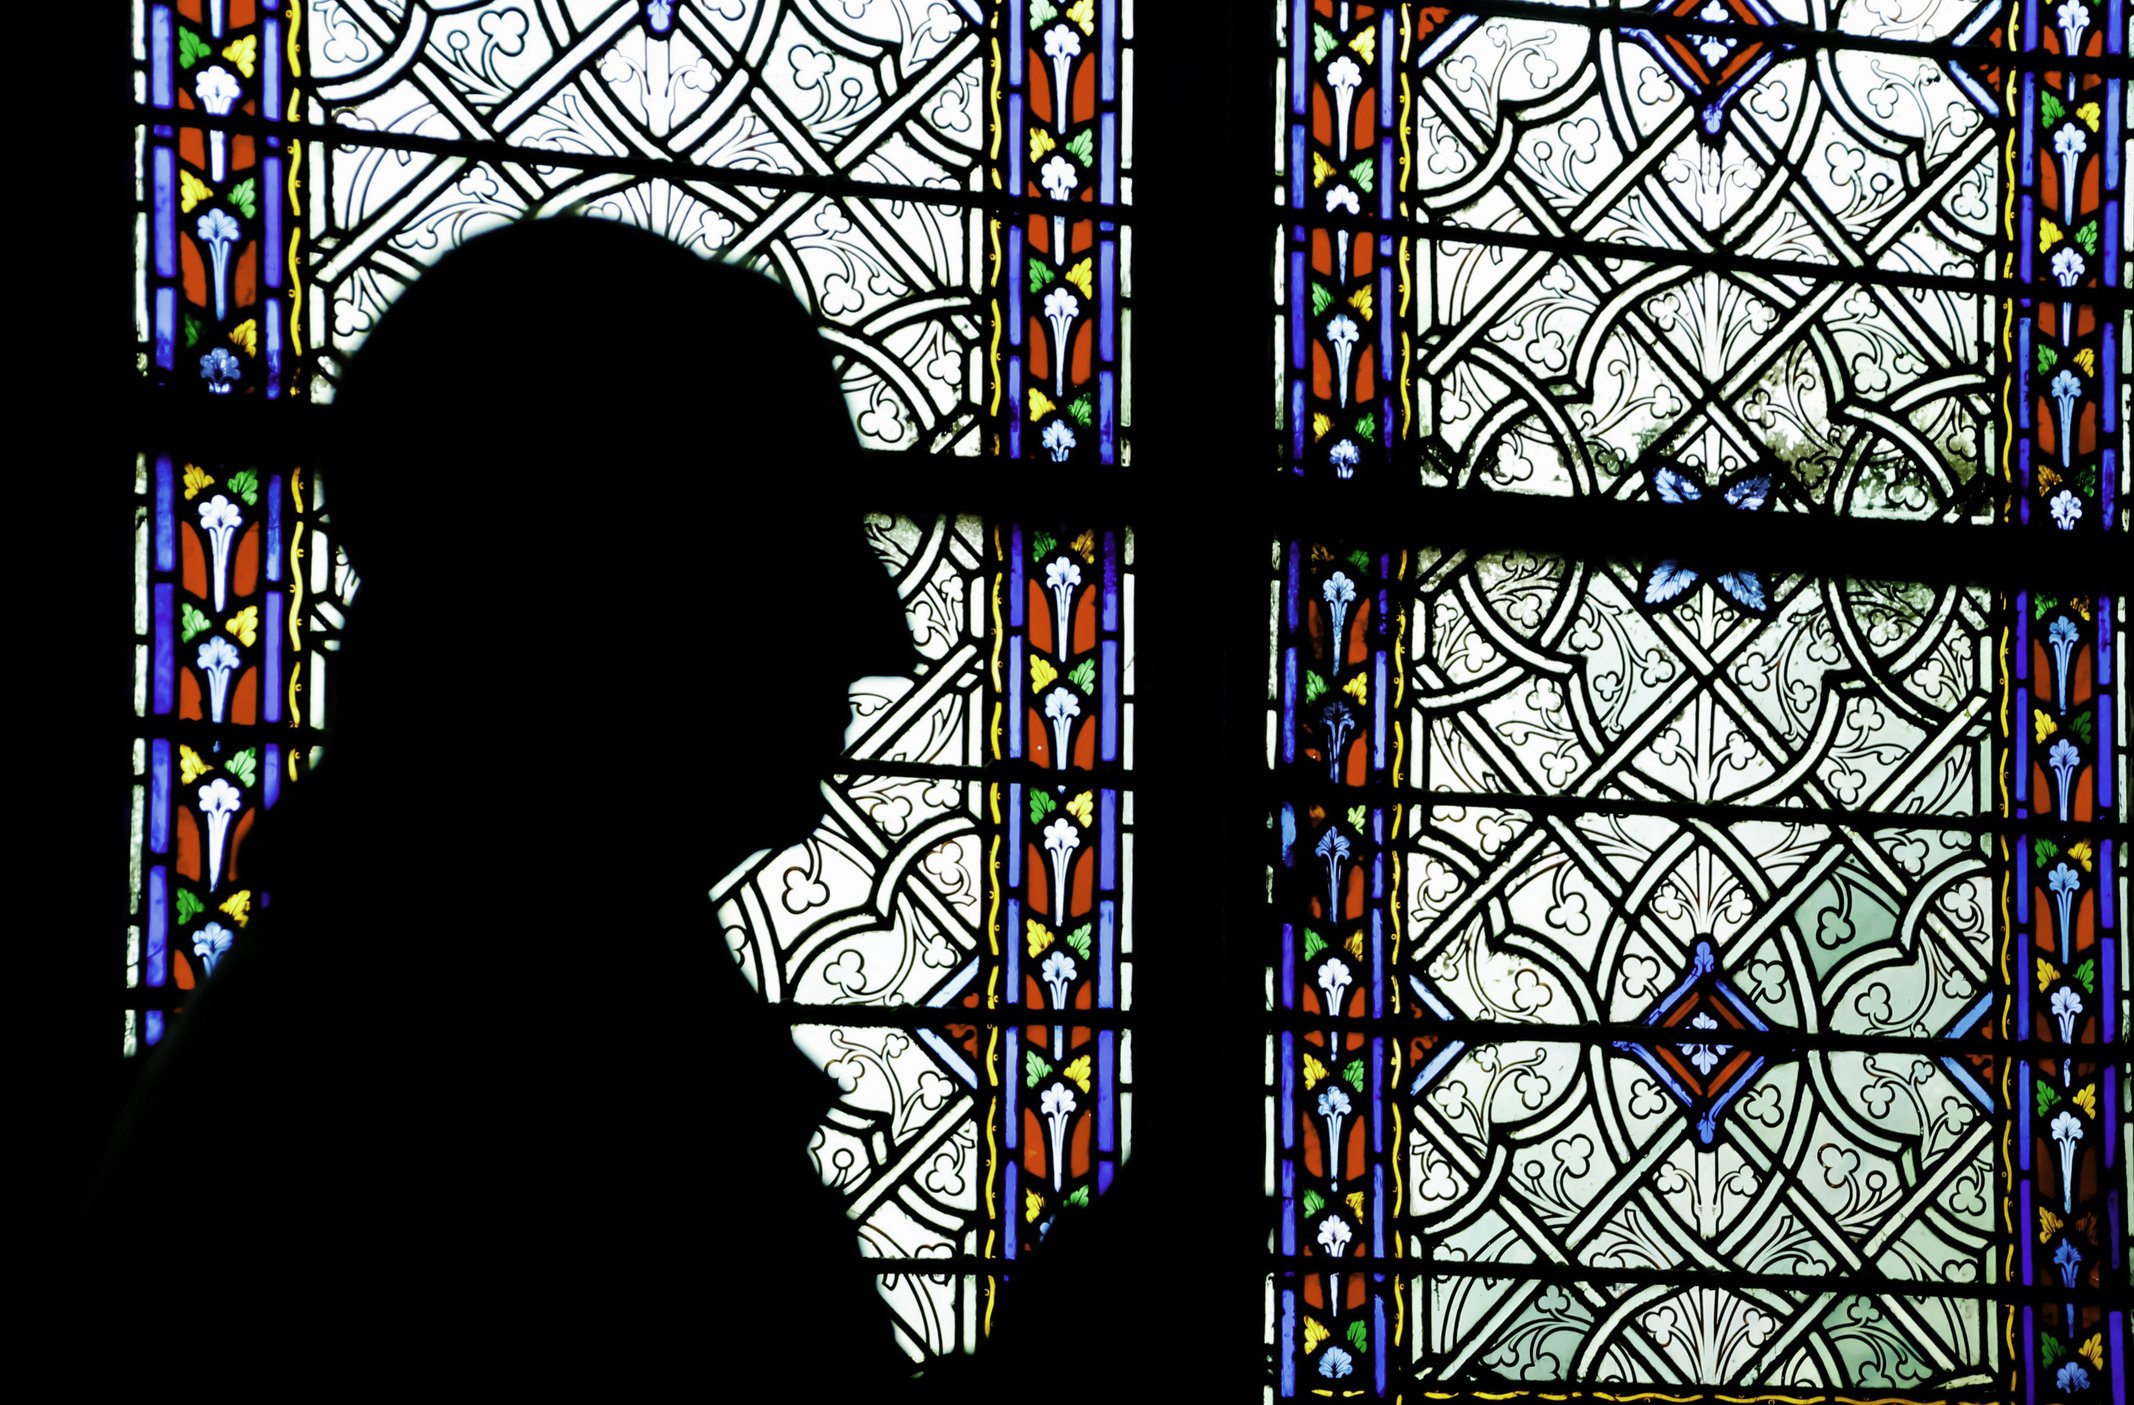 Man praying in front of stained glass window in church | Photo: Getty Images